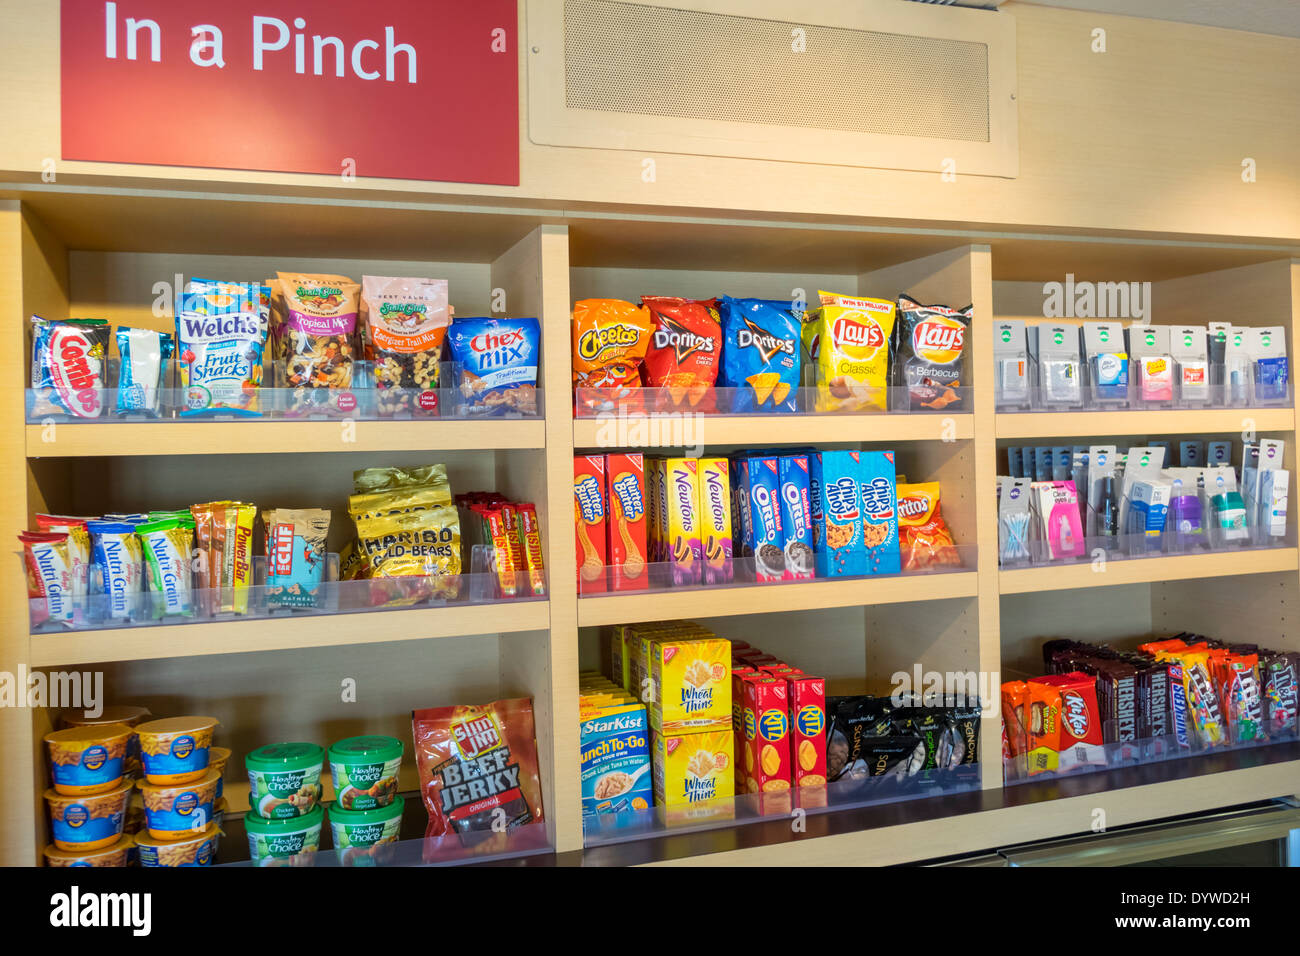 Los Angeles California,Manhattan Beach,Marriott,TownePlace Suites,extended-stay,hotel,chain,lodging,convenience store,sundries,snacks,snack food,cooki Stock Photo